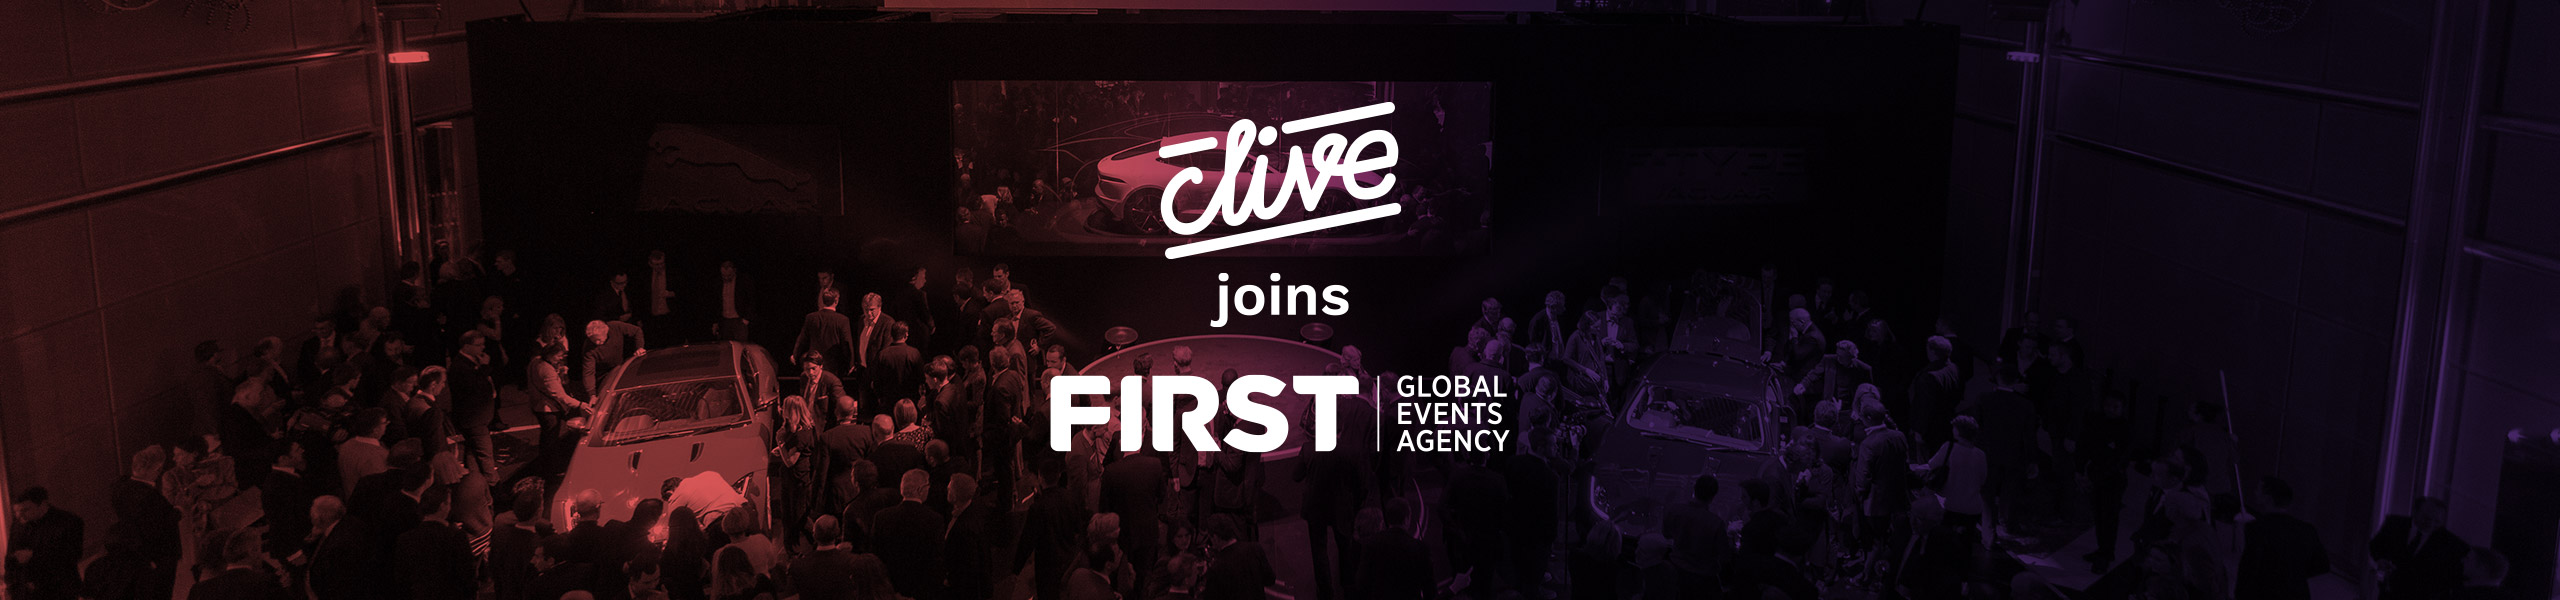 Clive joins FIRST